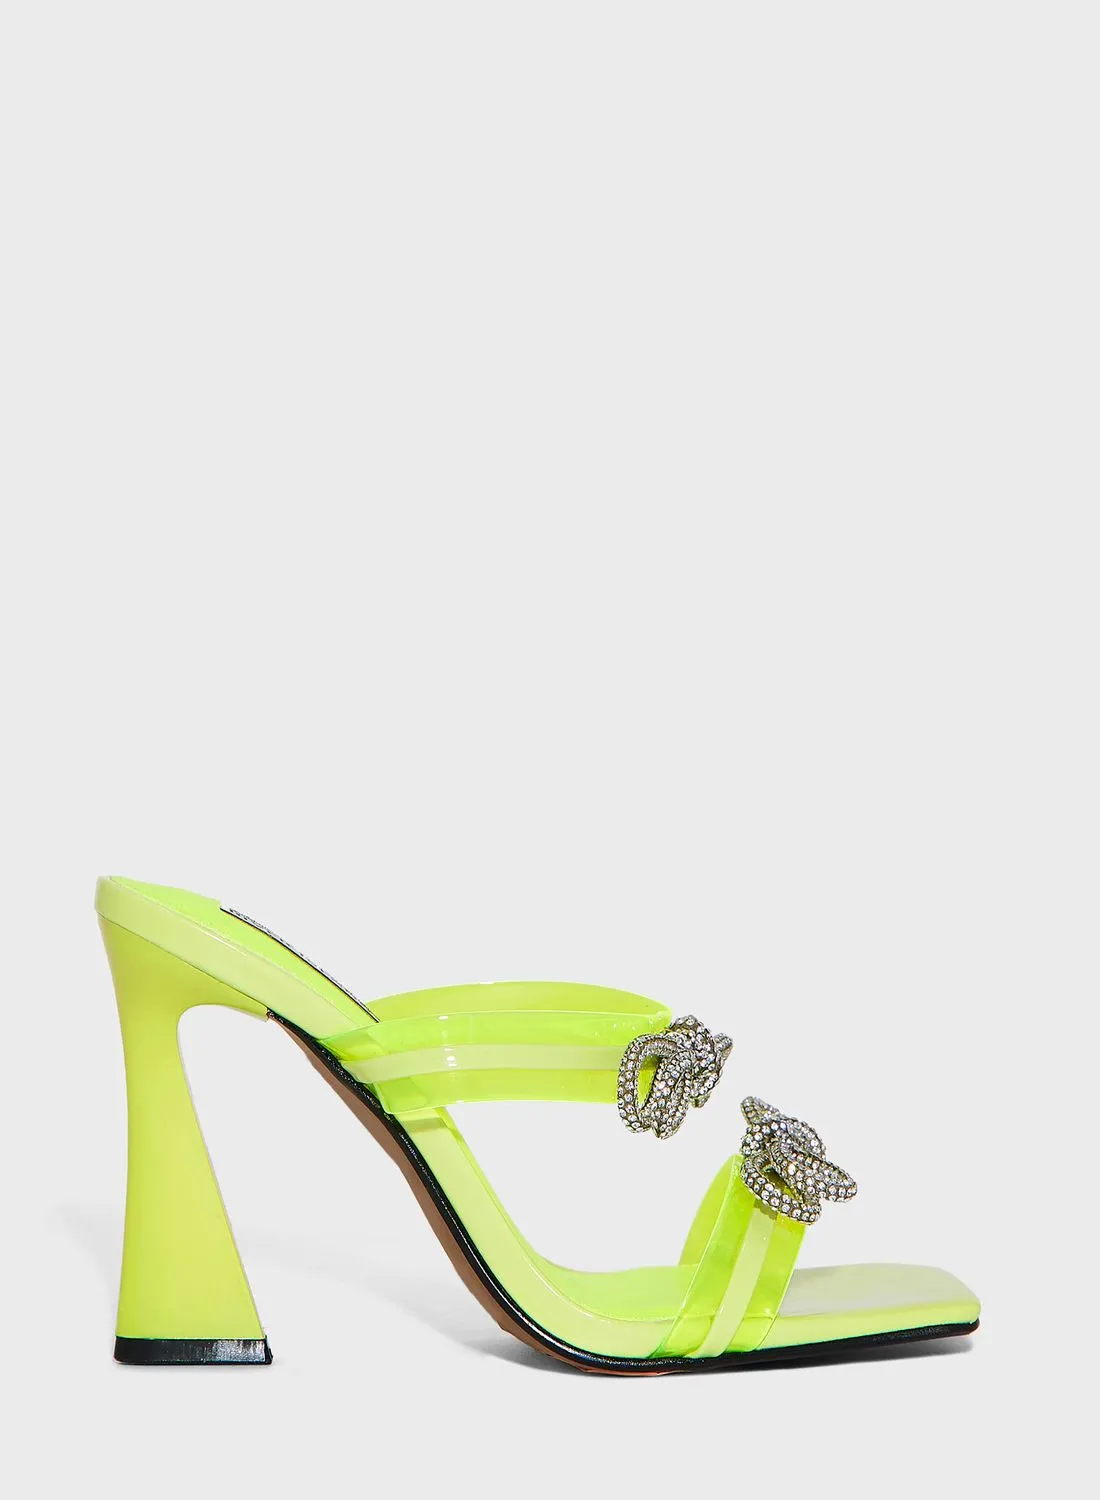 RIVER ISLAND Double Strap Bow Perspex Mule